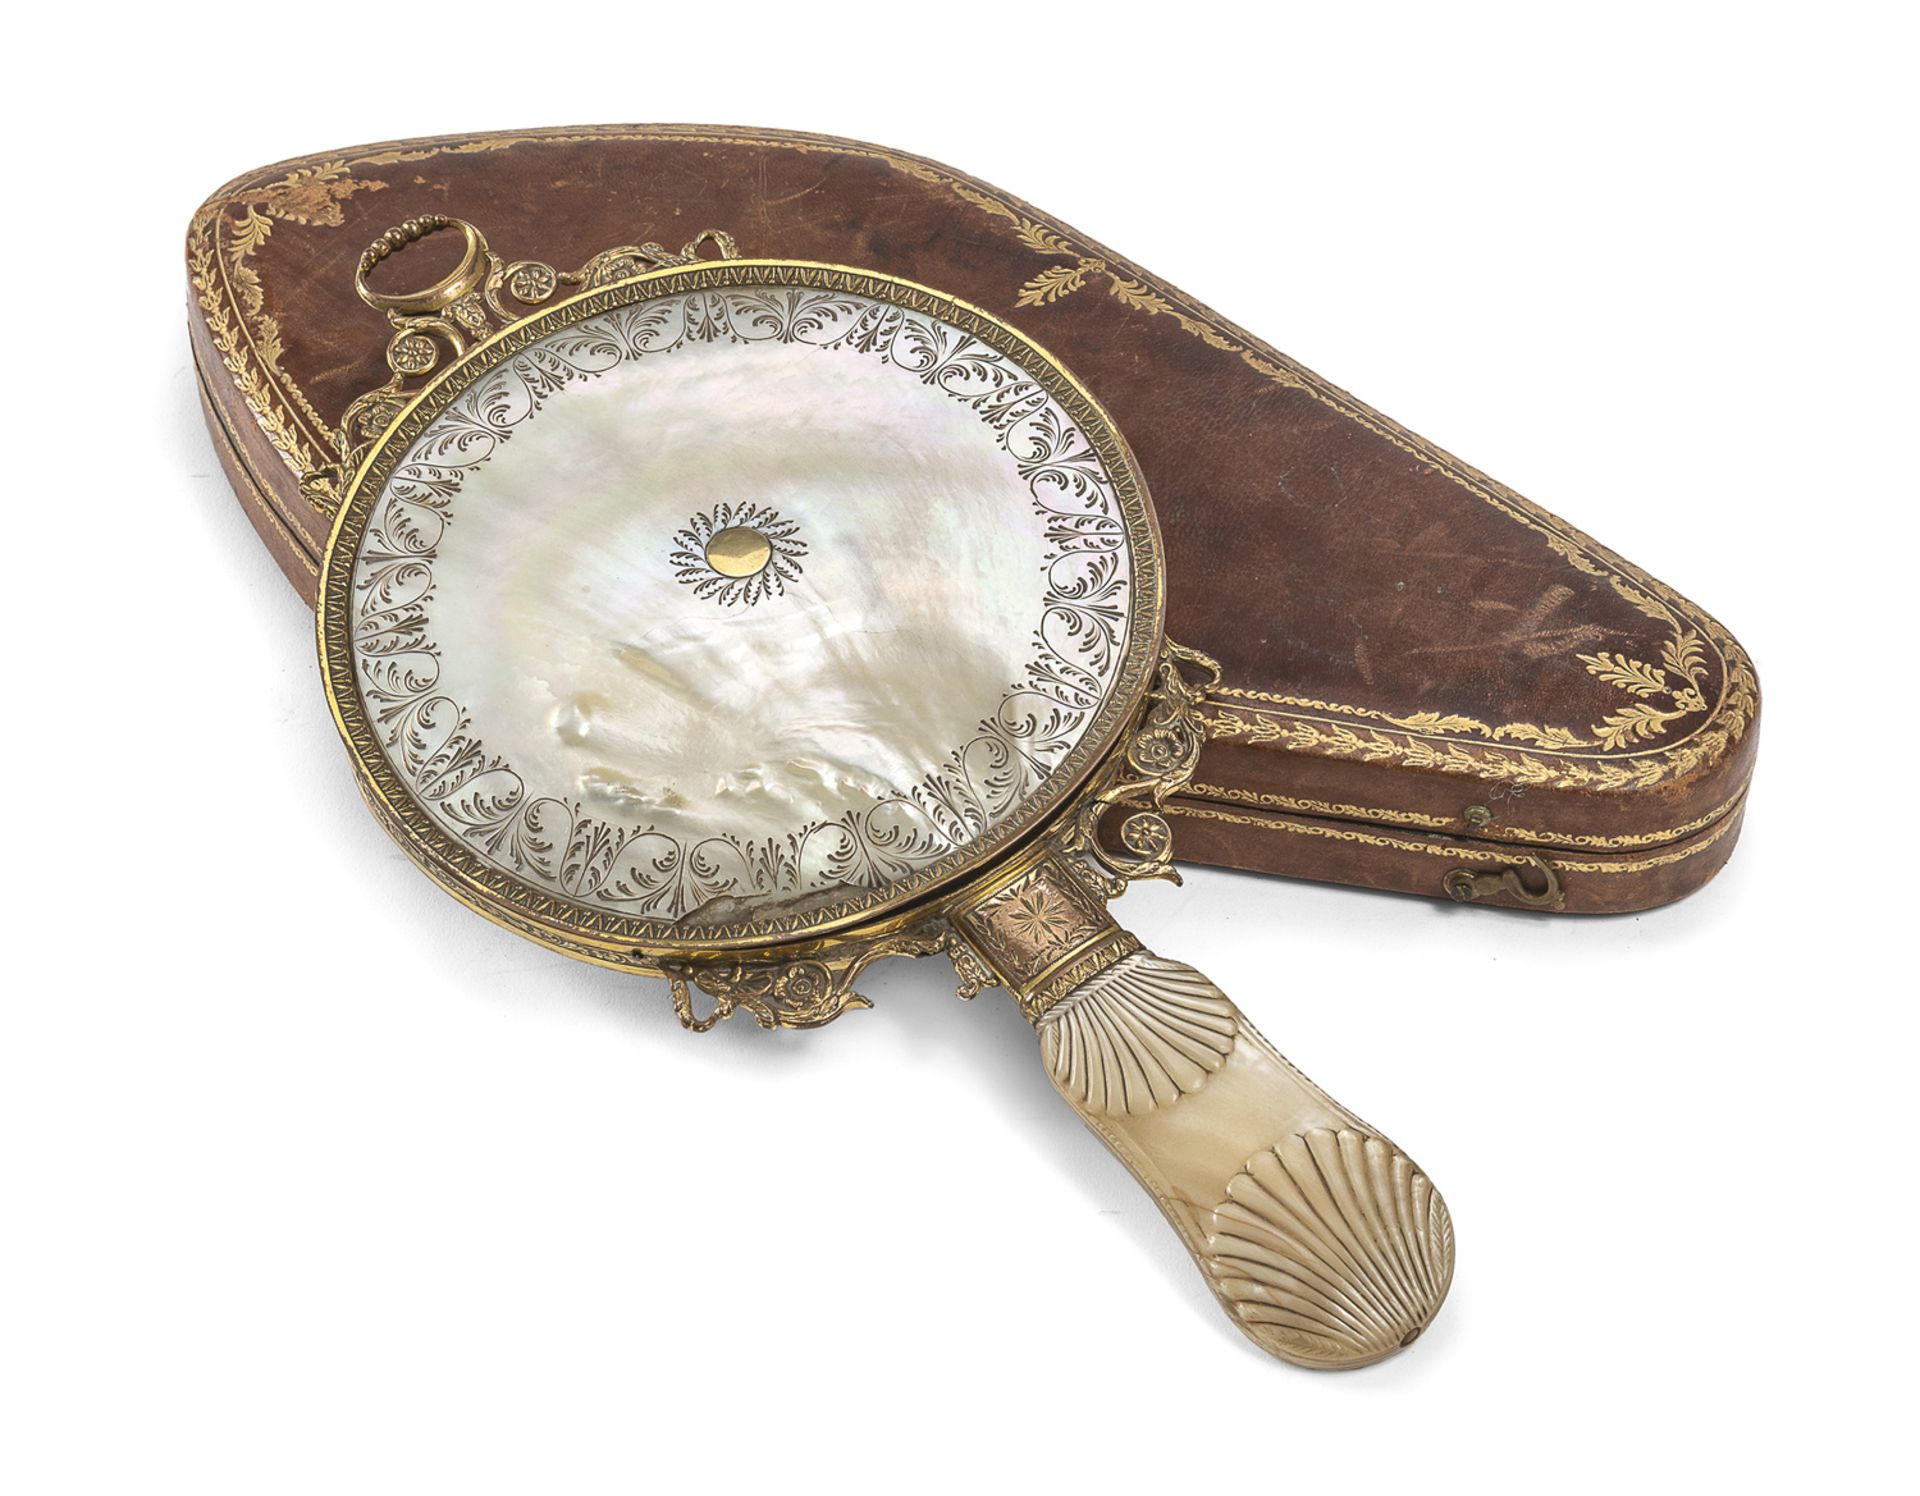 BEAUTIFUL HAND MIRROR PROBABLY RUSSIA EARLY 19th CENTURY